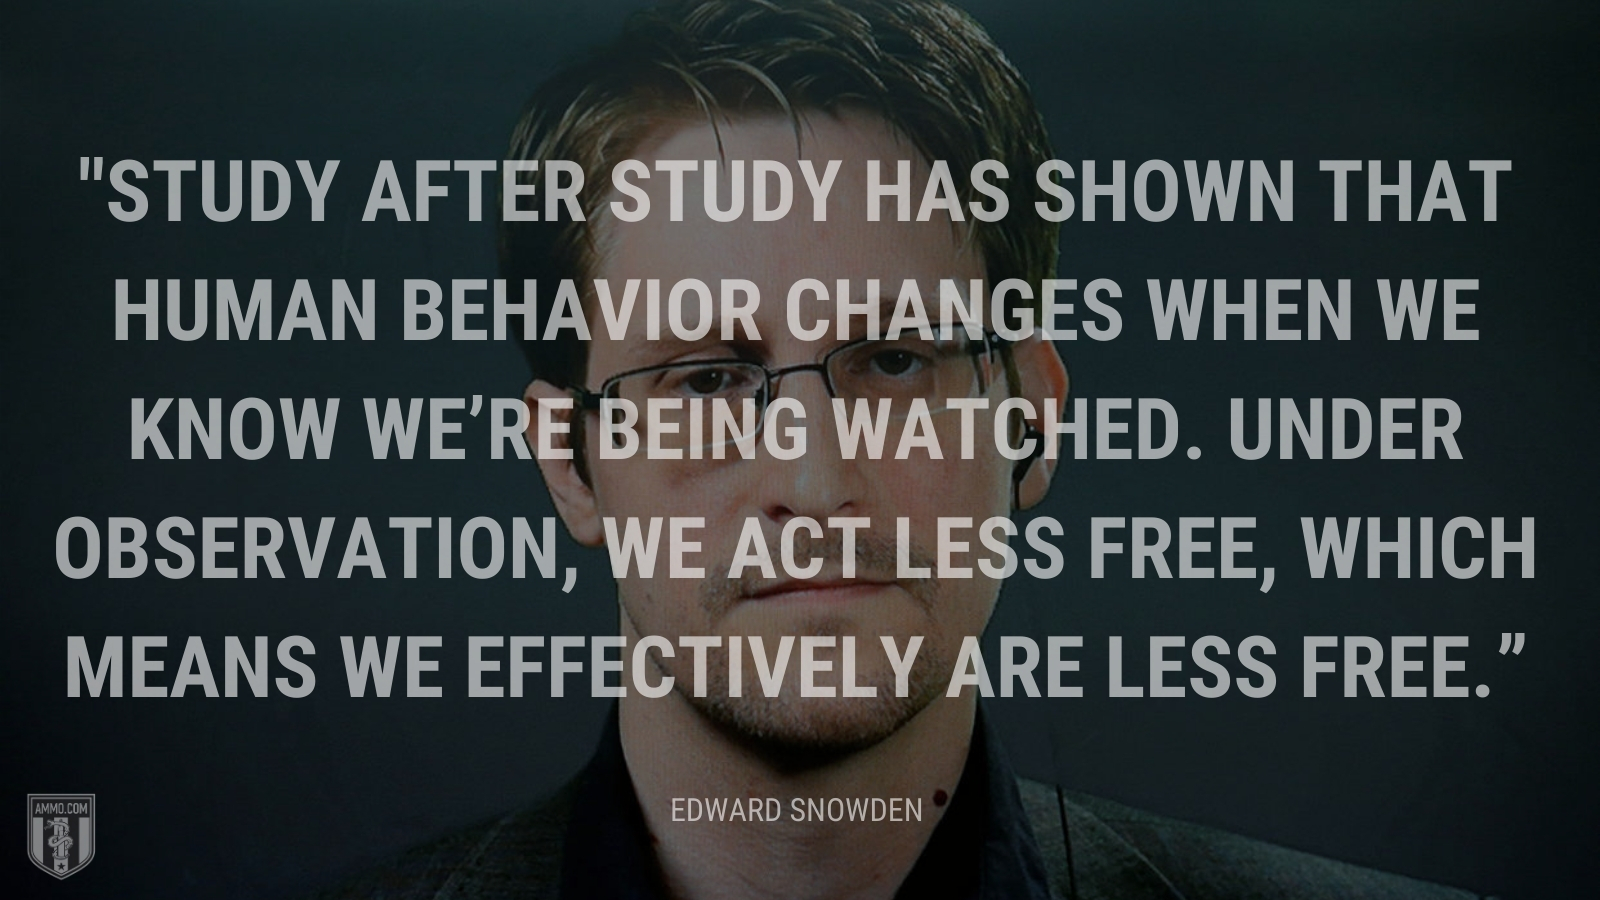 “Study after study has shown that human behavior changes when we know we’re being watched. Under observation, we act less free, which means we effectively are less free.” - Edward Snowden